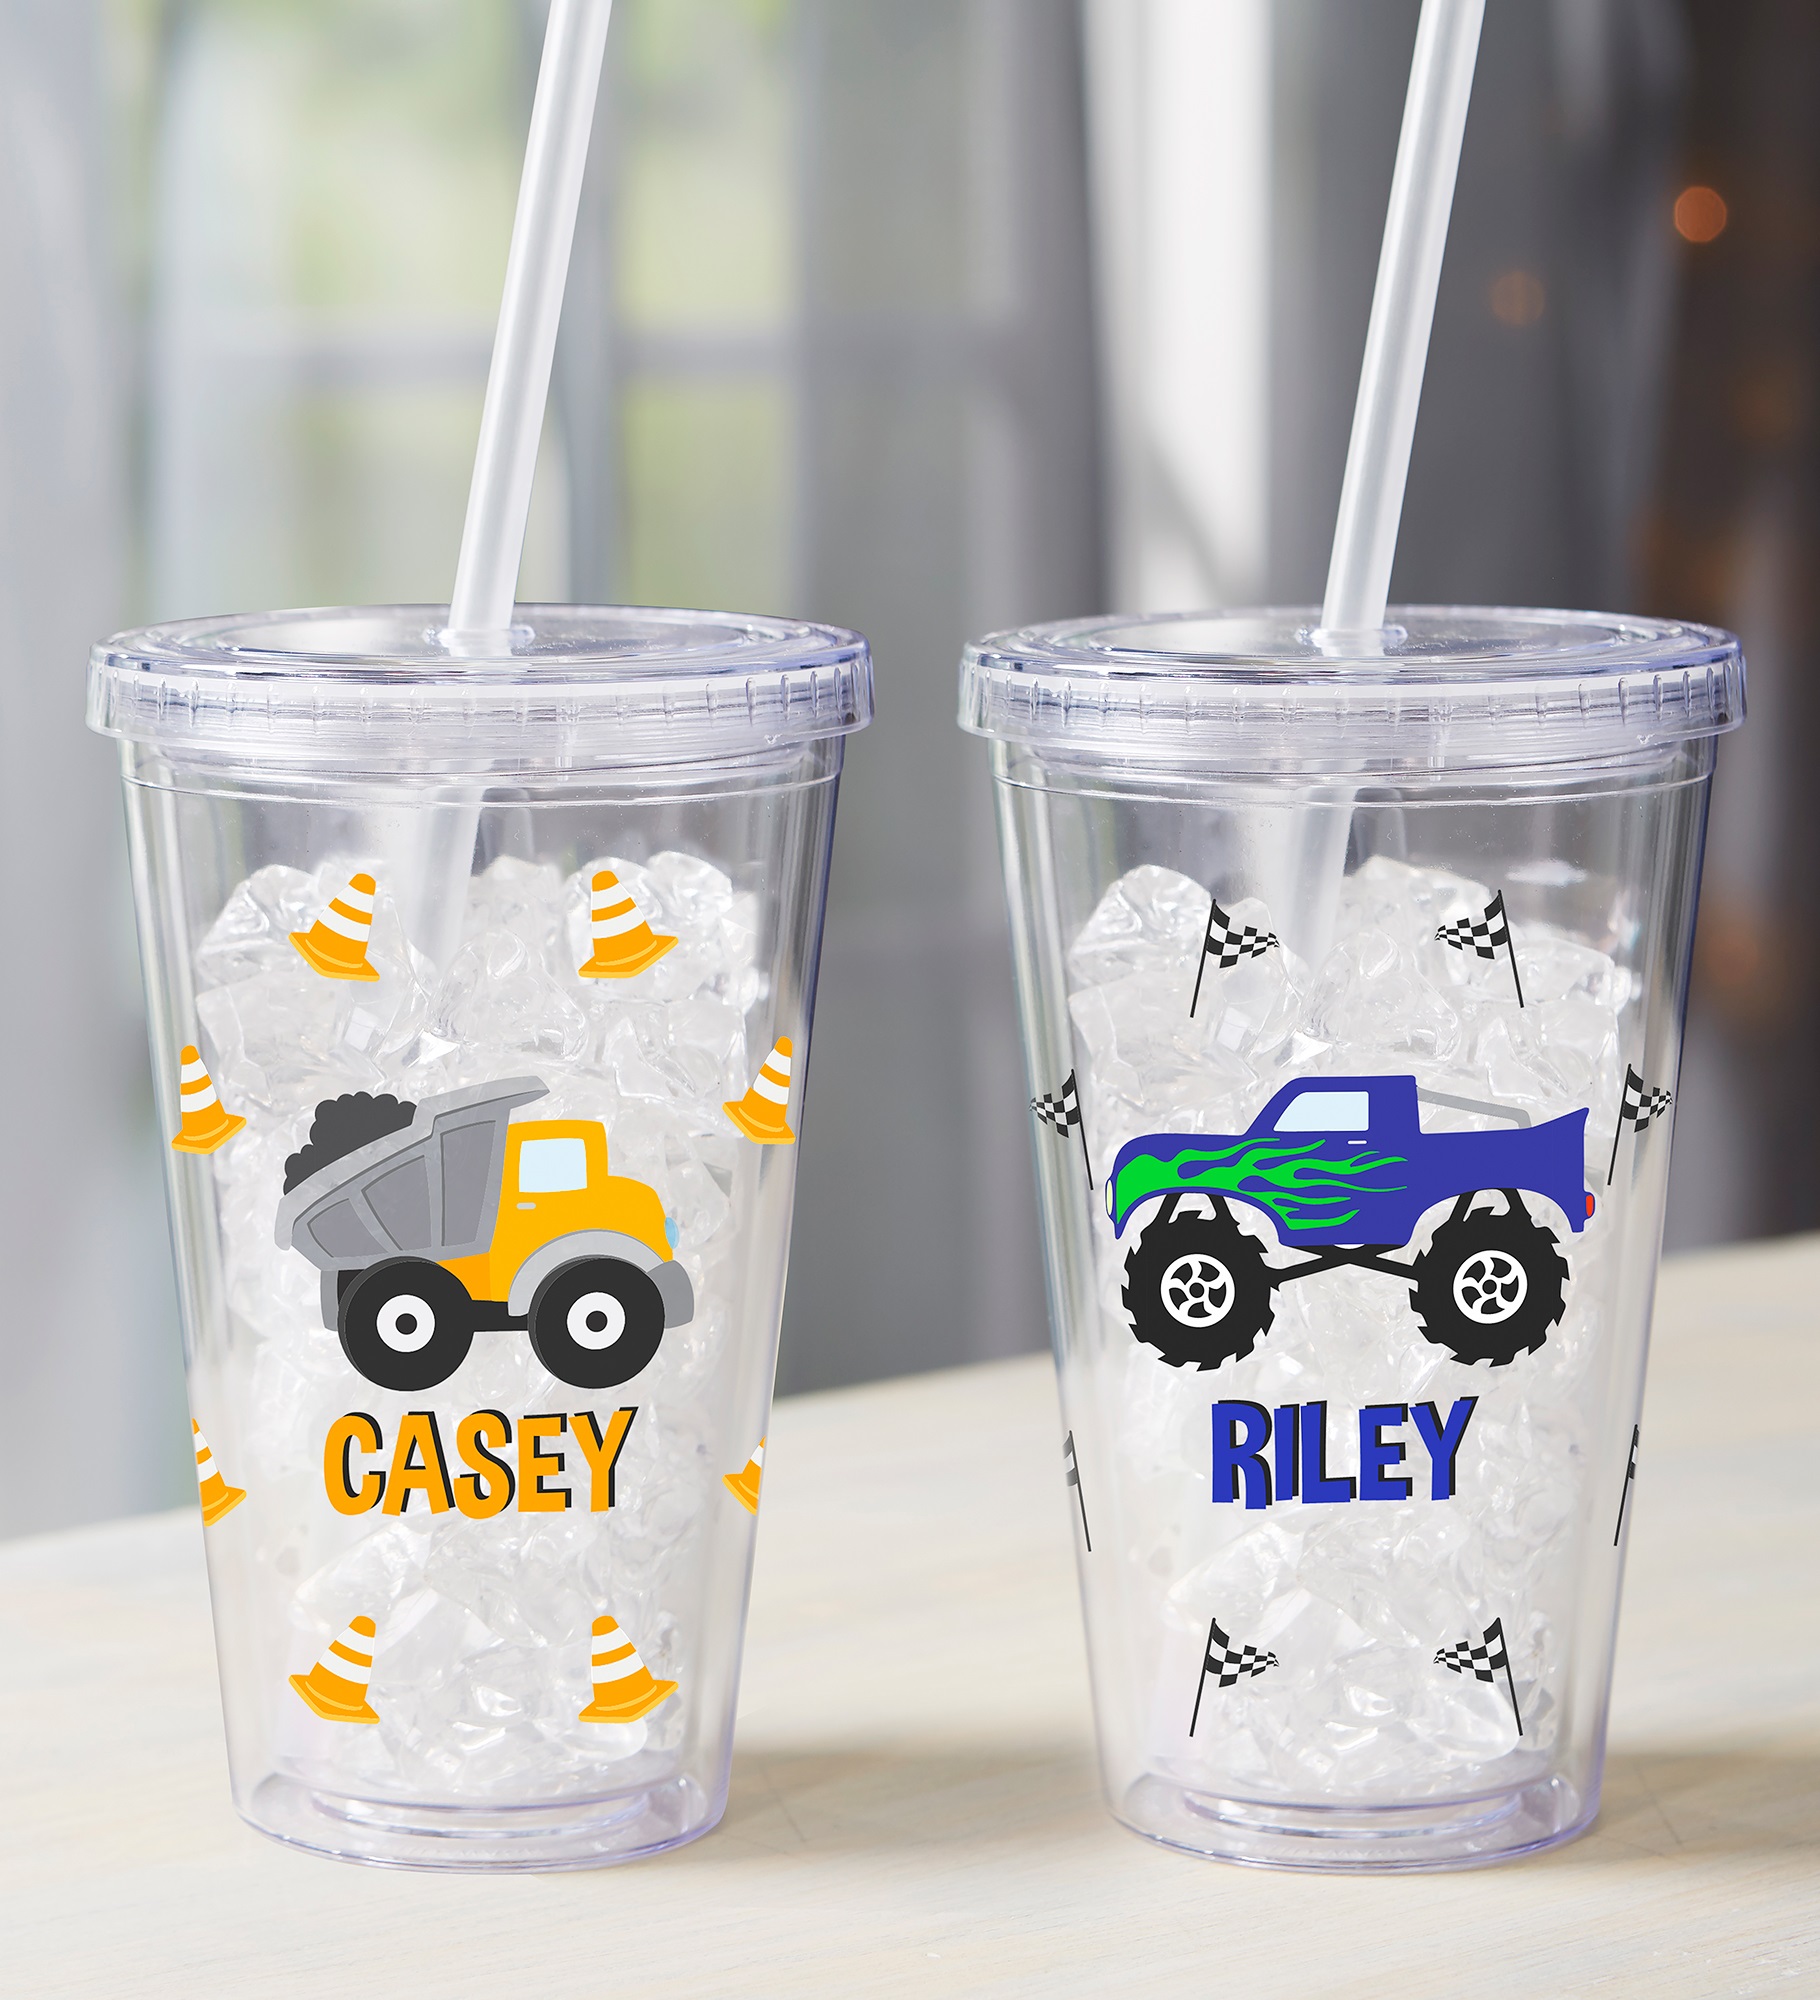 Construction & Monster Trucks Personalized 17 oz. Acrylic Insulated Tumbler